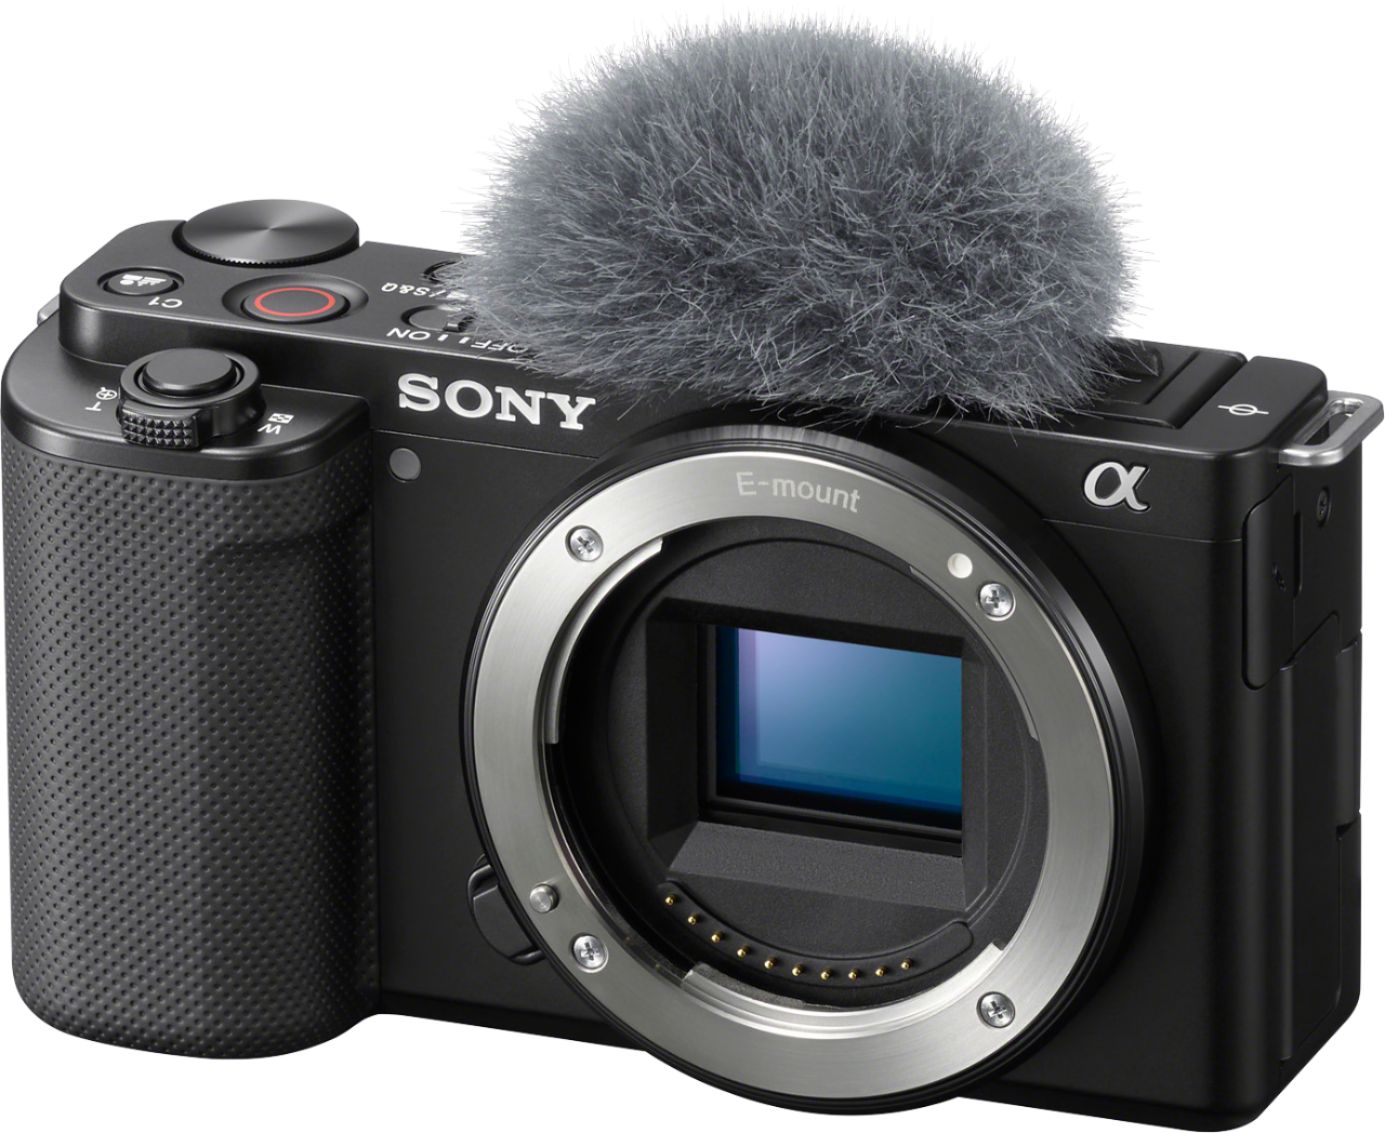 Angle View: Sony Alpha ZV-E10 - APS-C Interchangeable Lens Mirrorless Vlog Camera - White